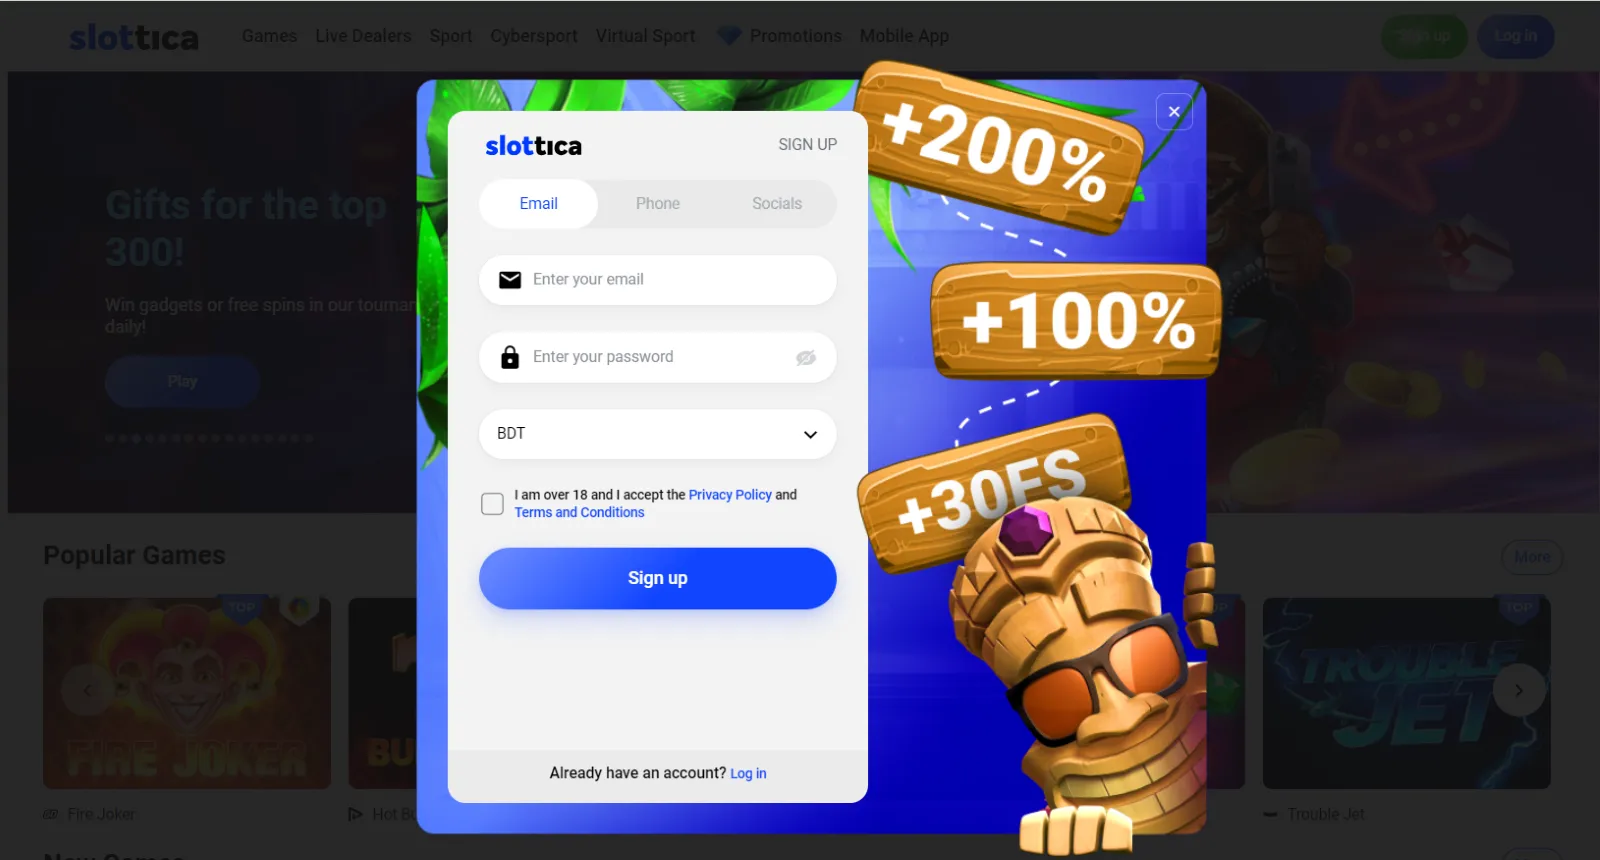 How to Access Slottica Crazy Time